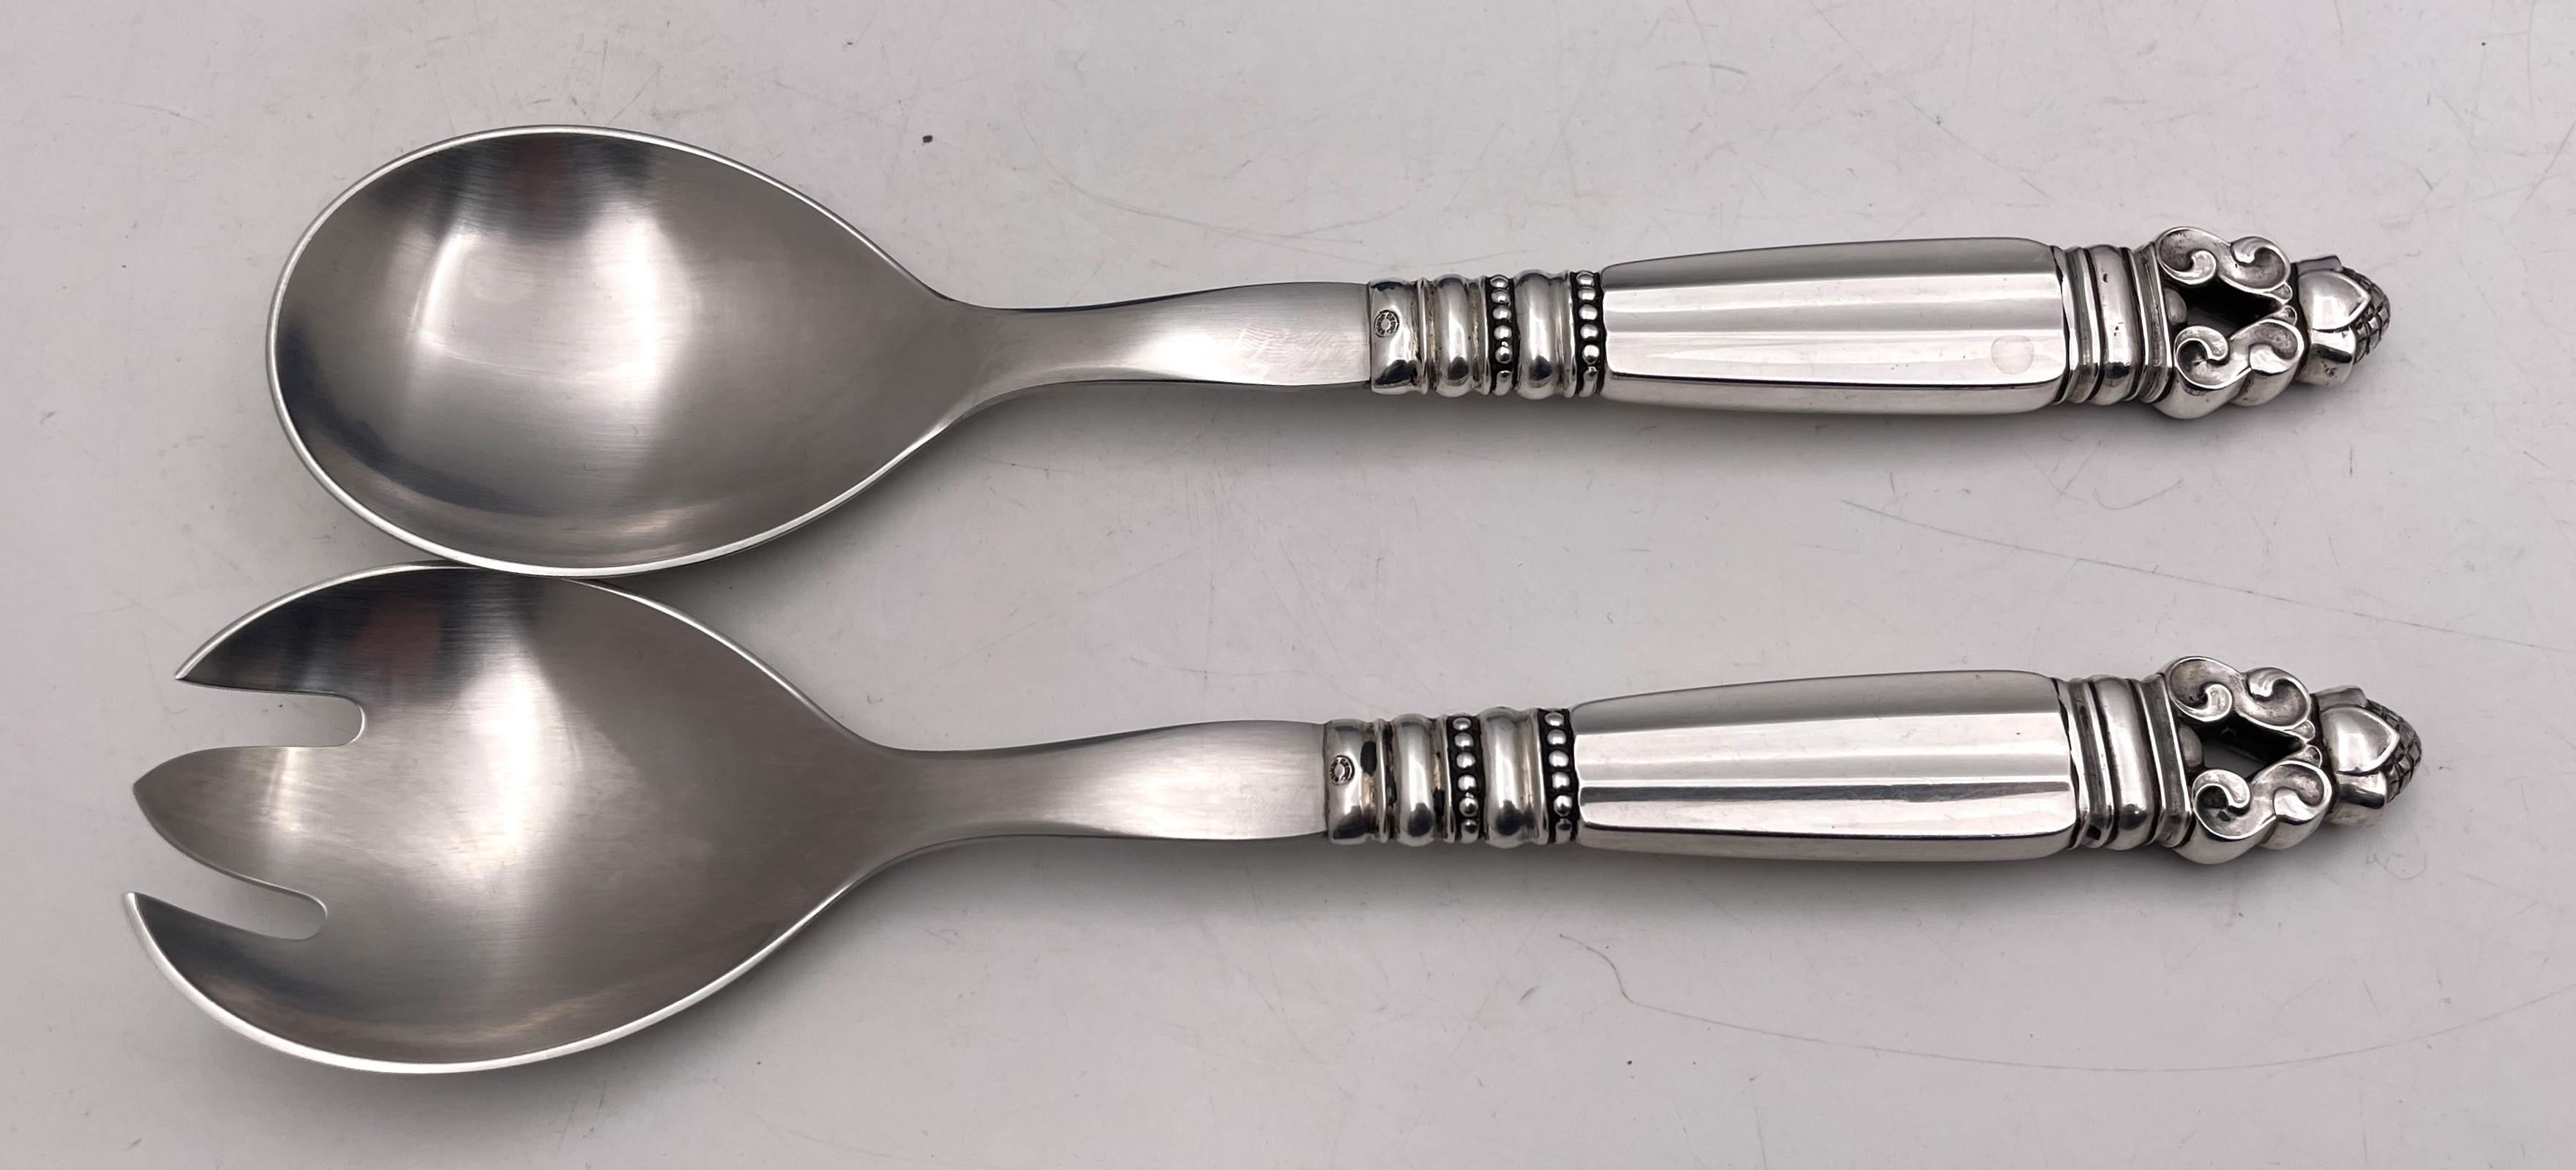 Georg Jensen sterling silver 76-piece flatware set in the celebrated Acorn pattern, designed by Johan Rohde, enhanced with stylized natural motifs, from the 1930s or early 1940s, consisting of:

- 12 Texan-sized dinner knives measuring 10'' in